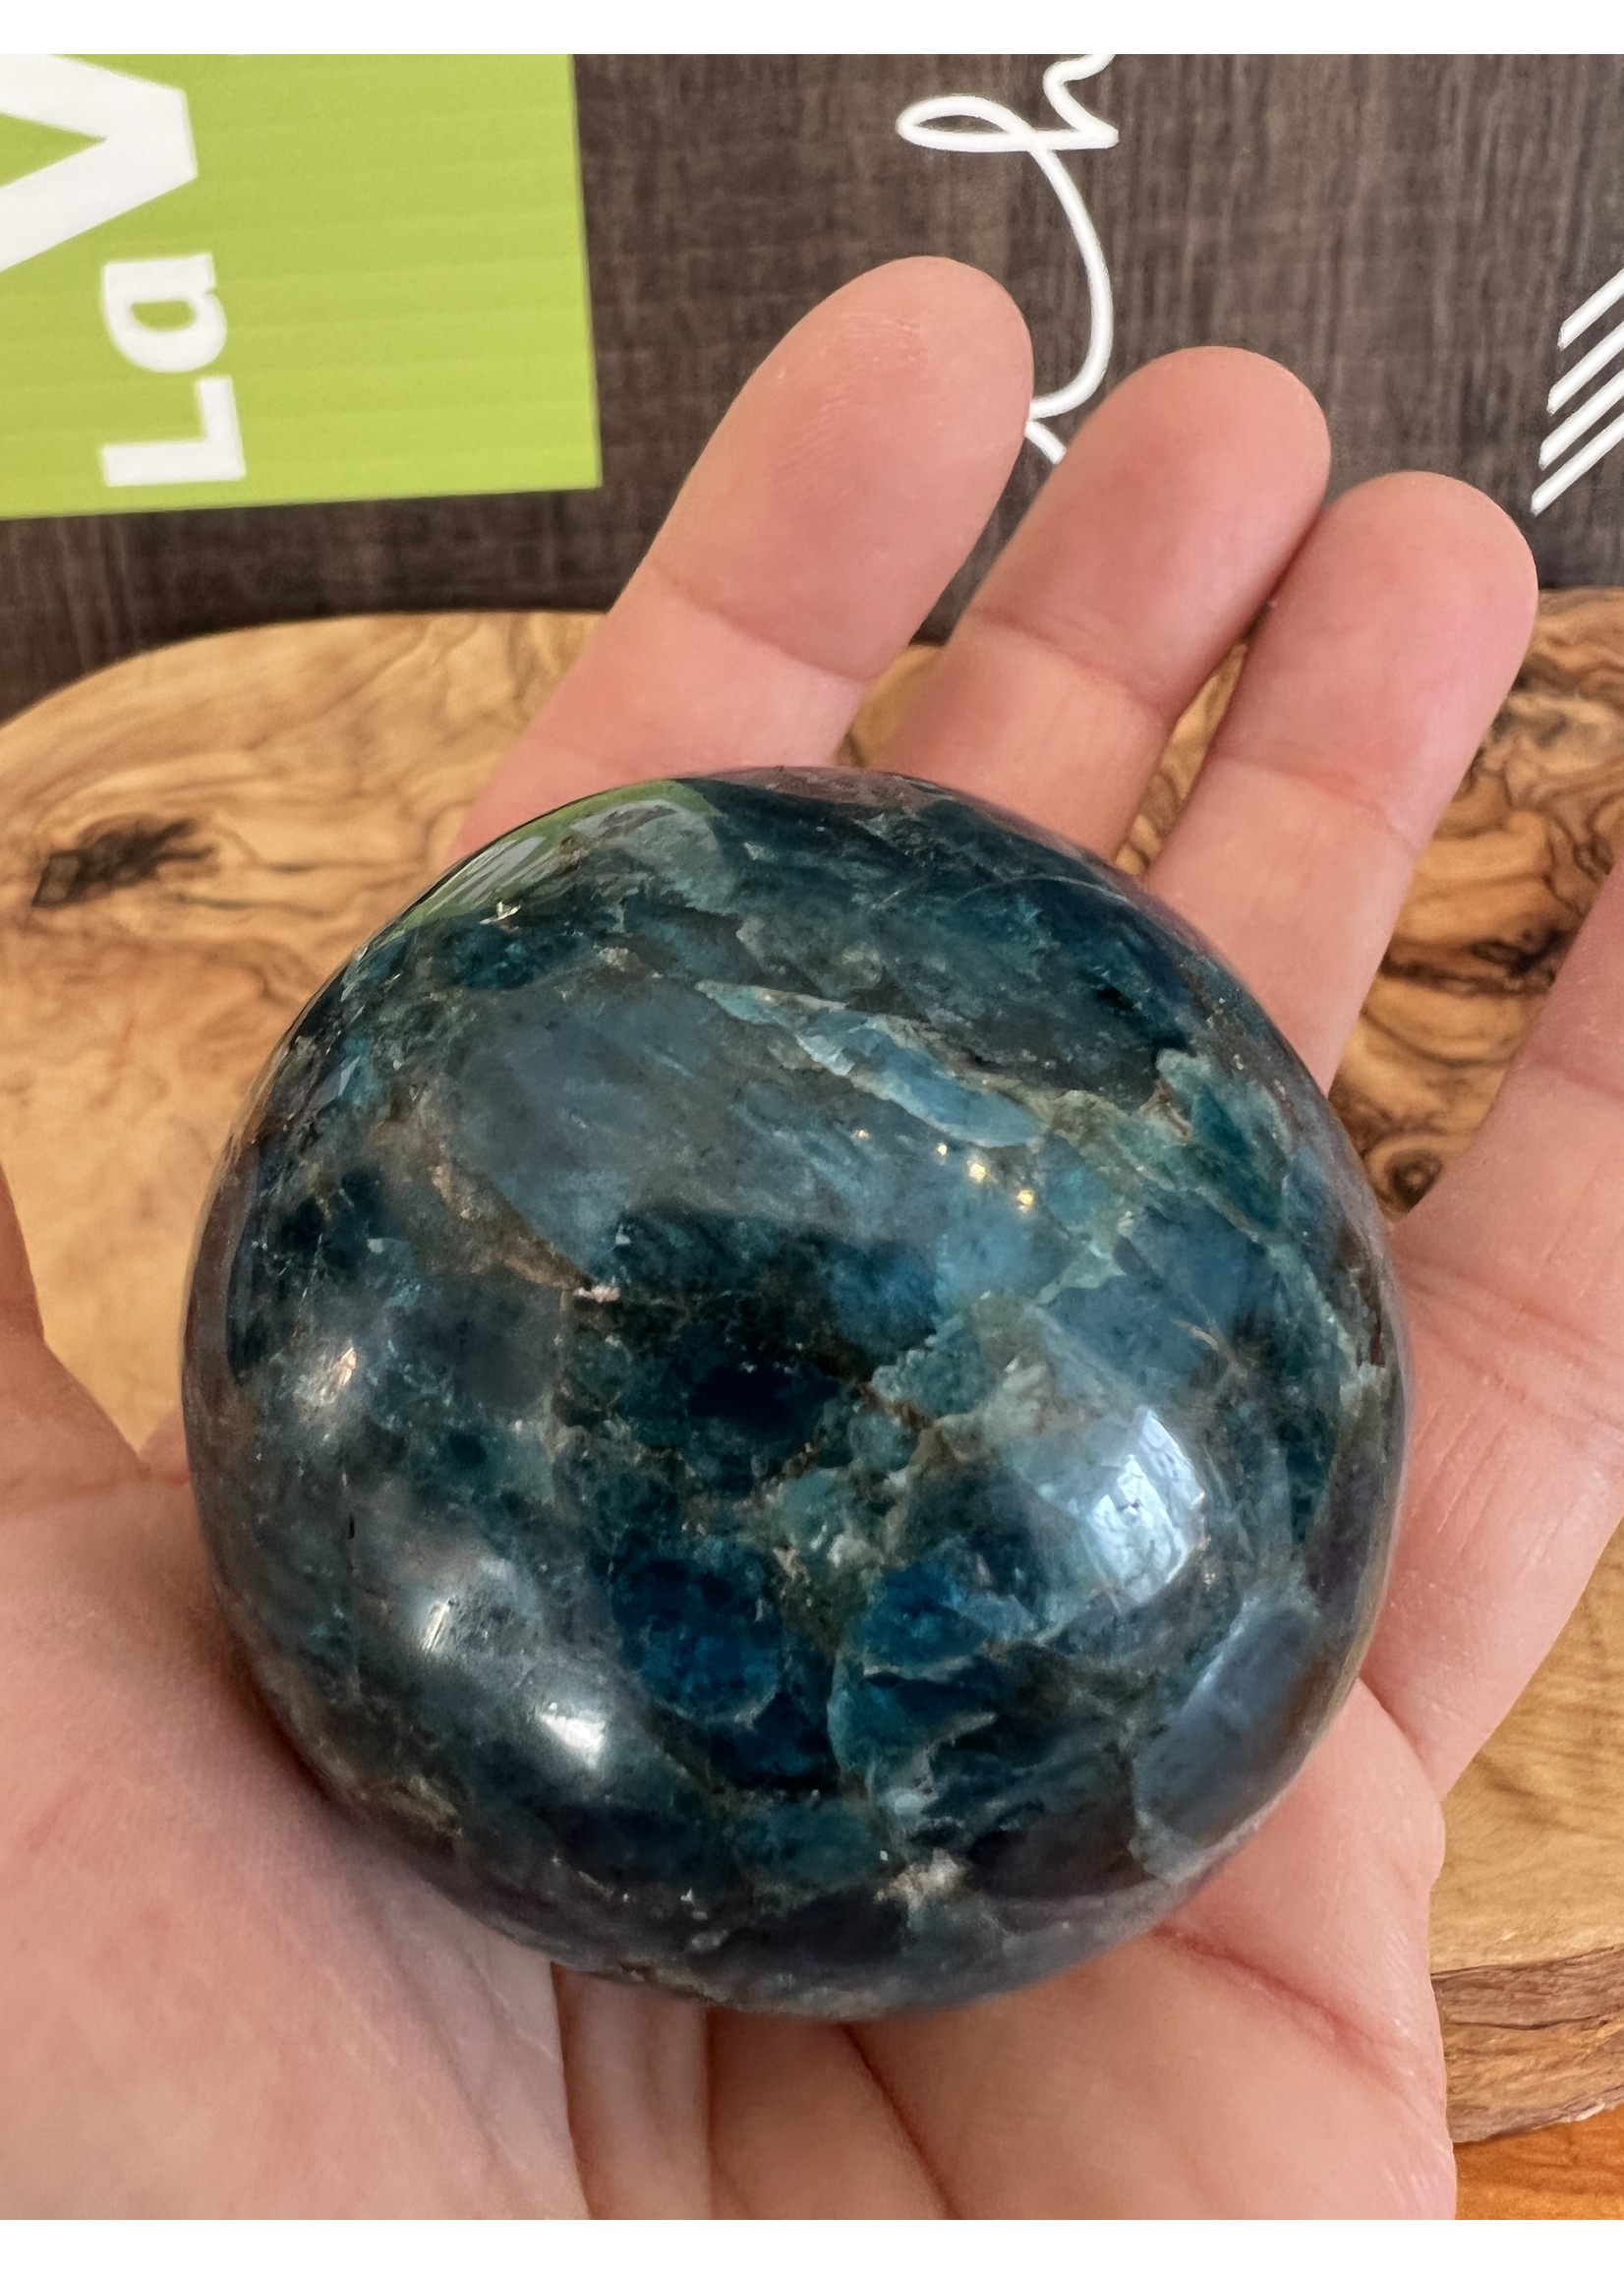 stunning apatite sphere, used to facilitate communication and self-expression